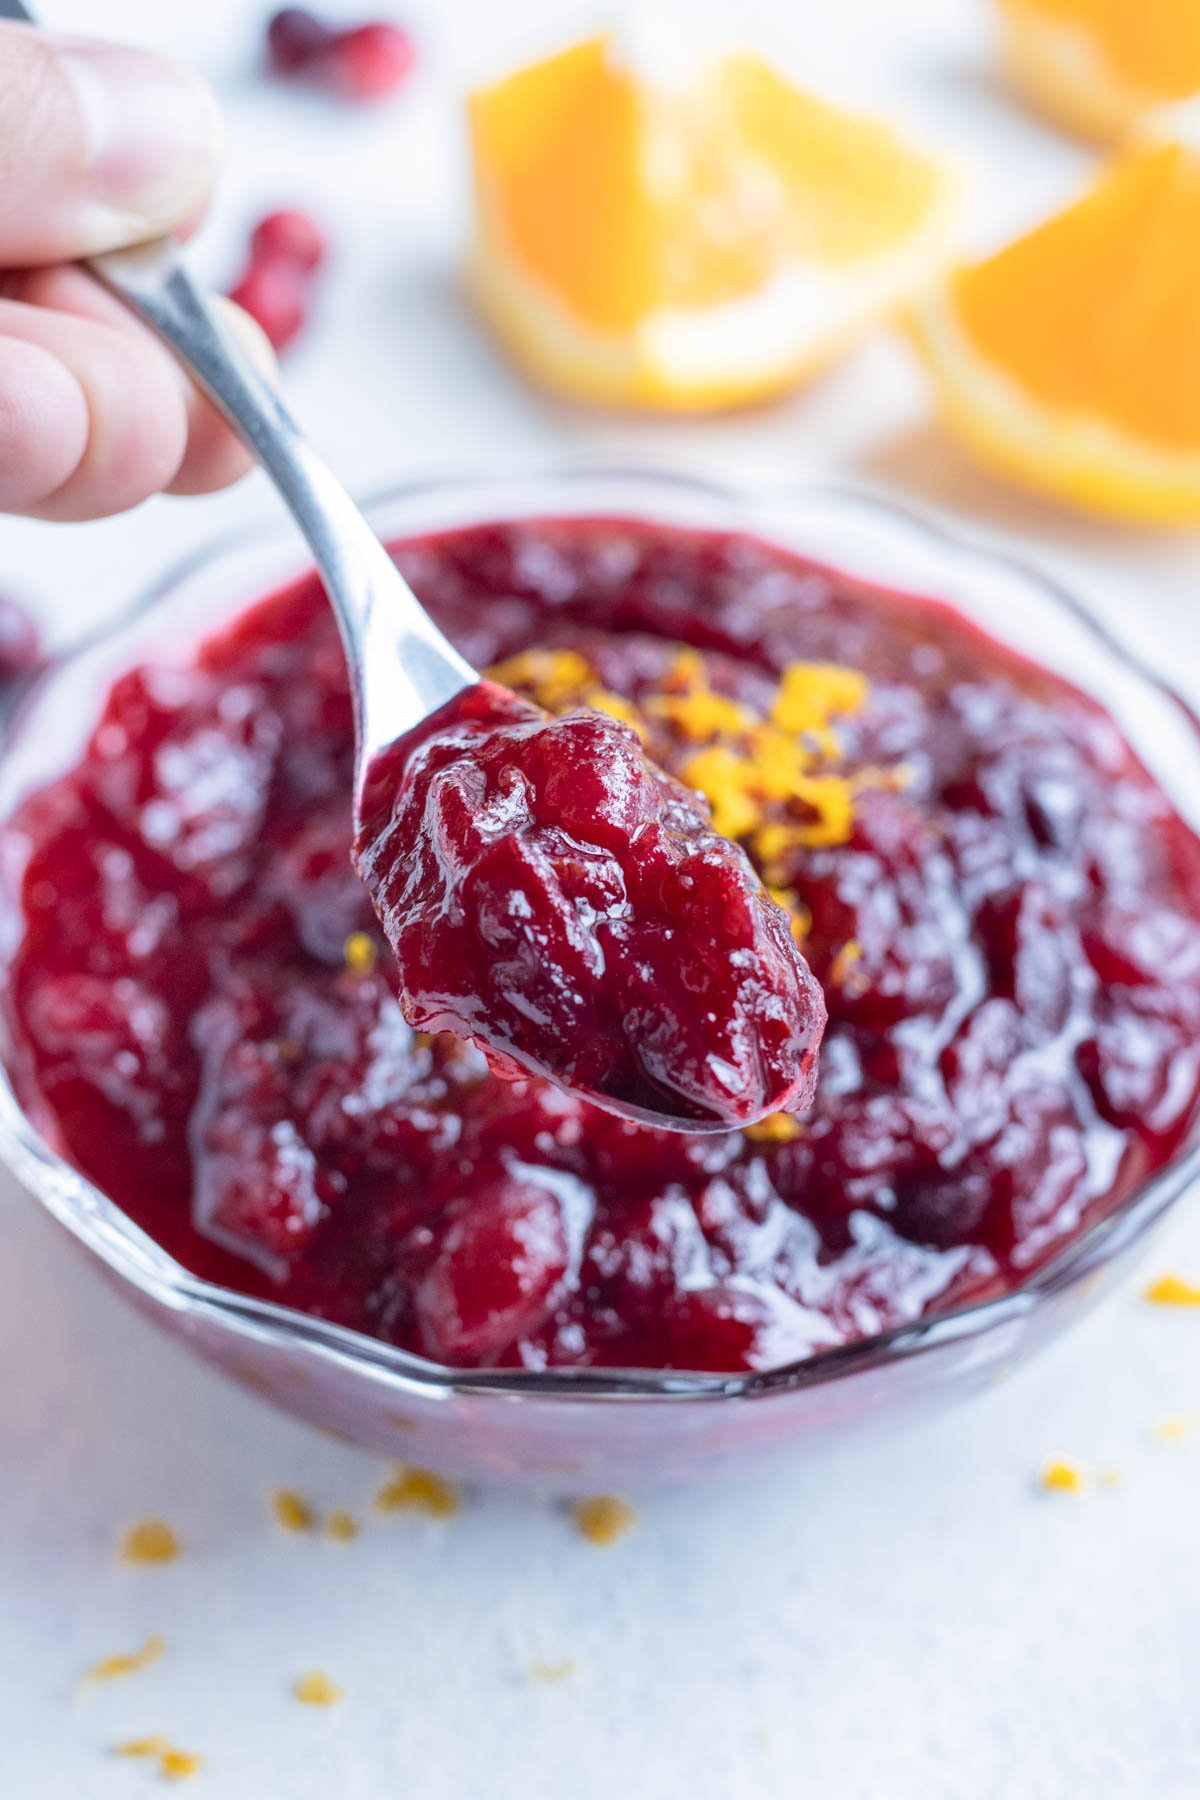 A spoon is lifted out of the bowl of cranberry sauce.